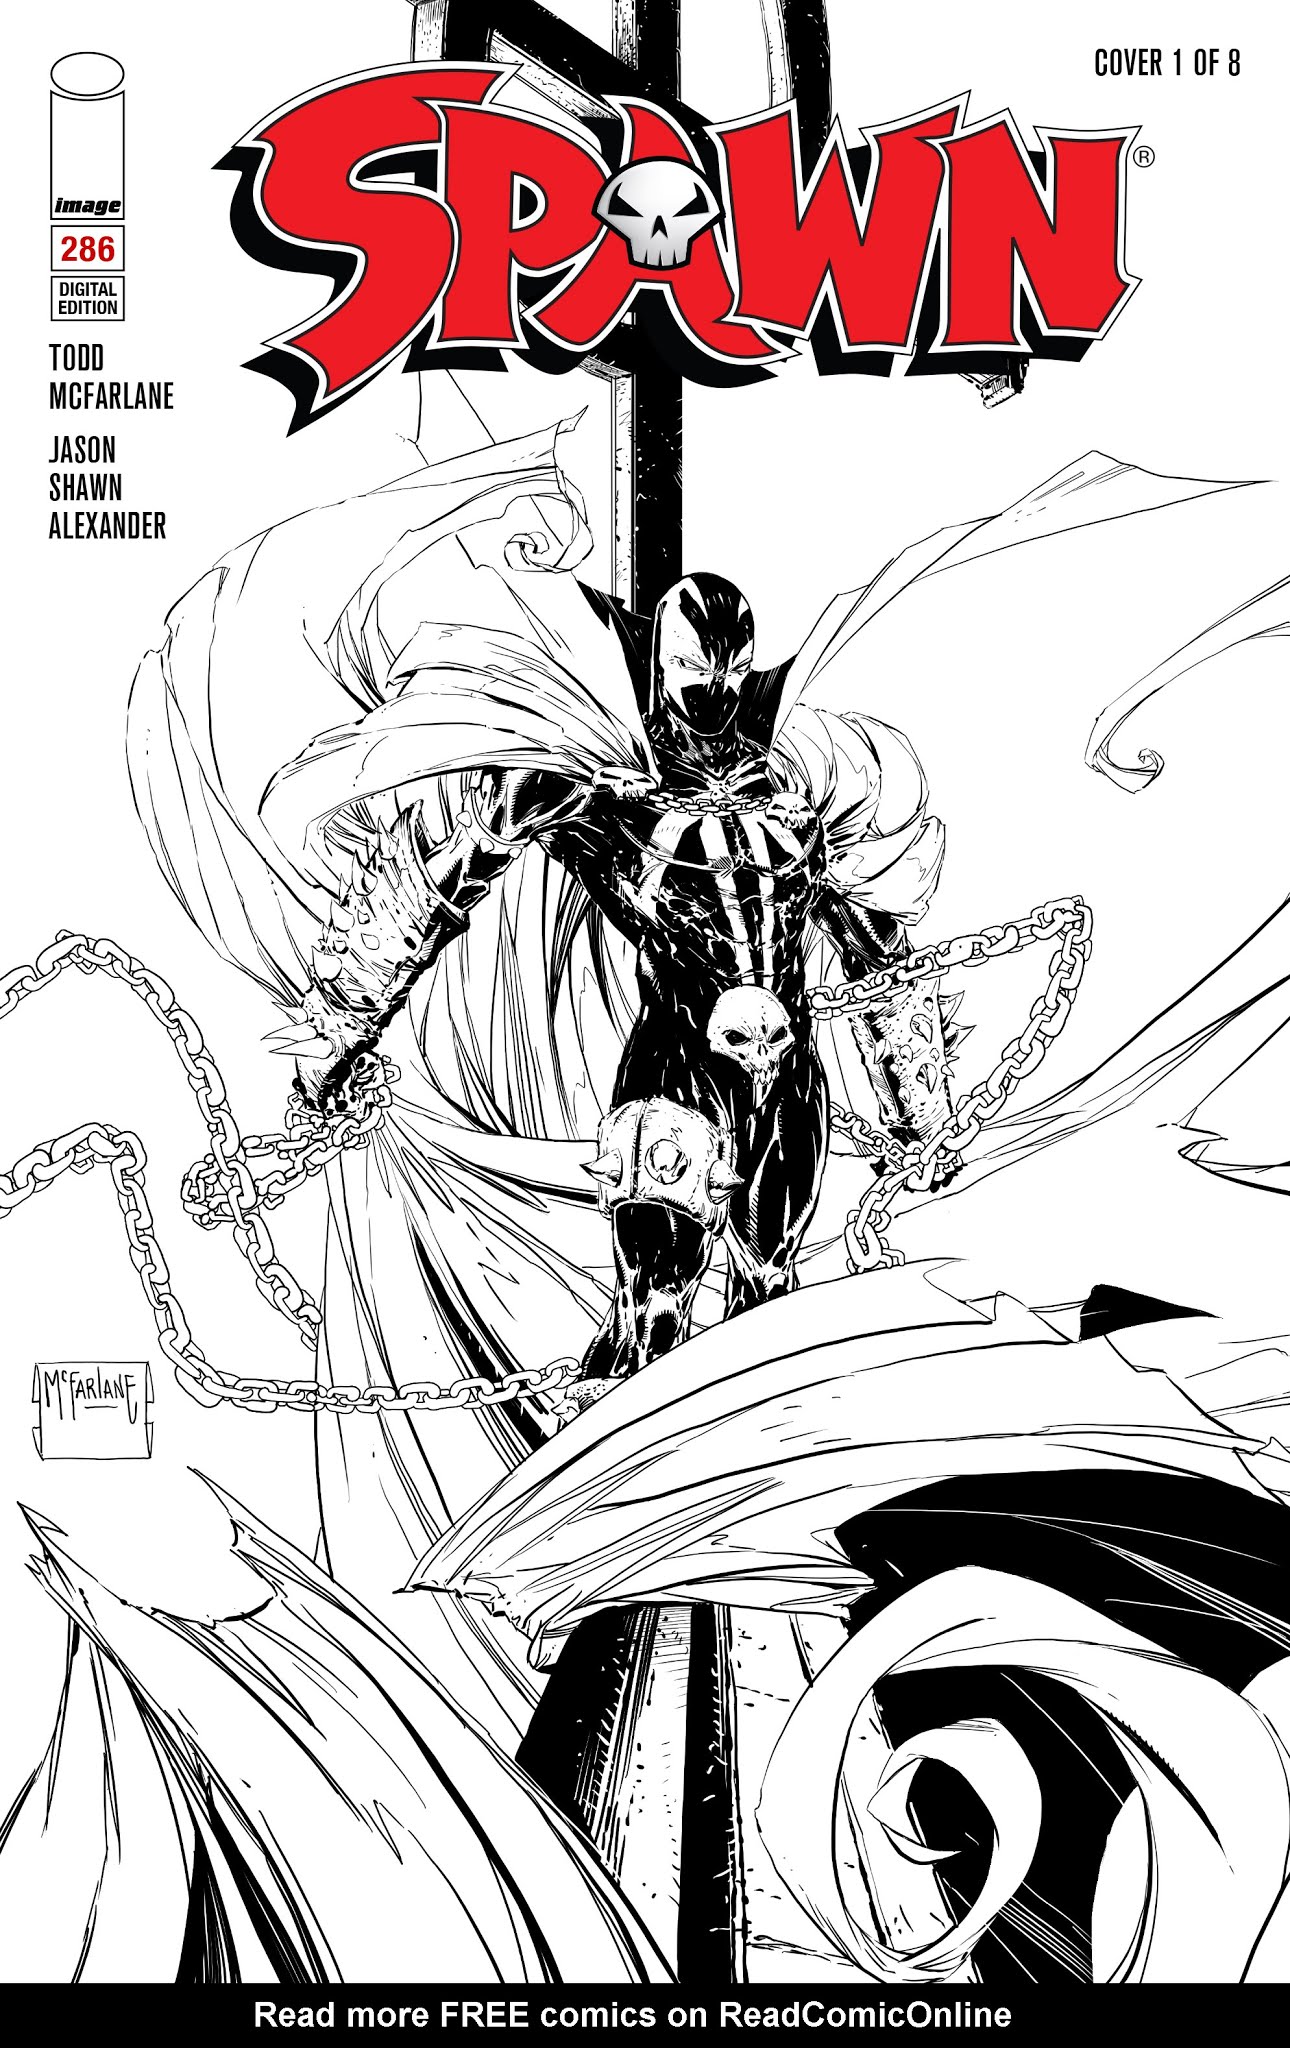 Read online Spawn comic -  Issue #286 - 1